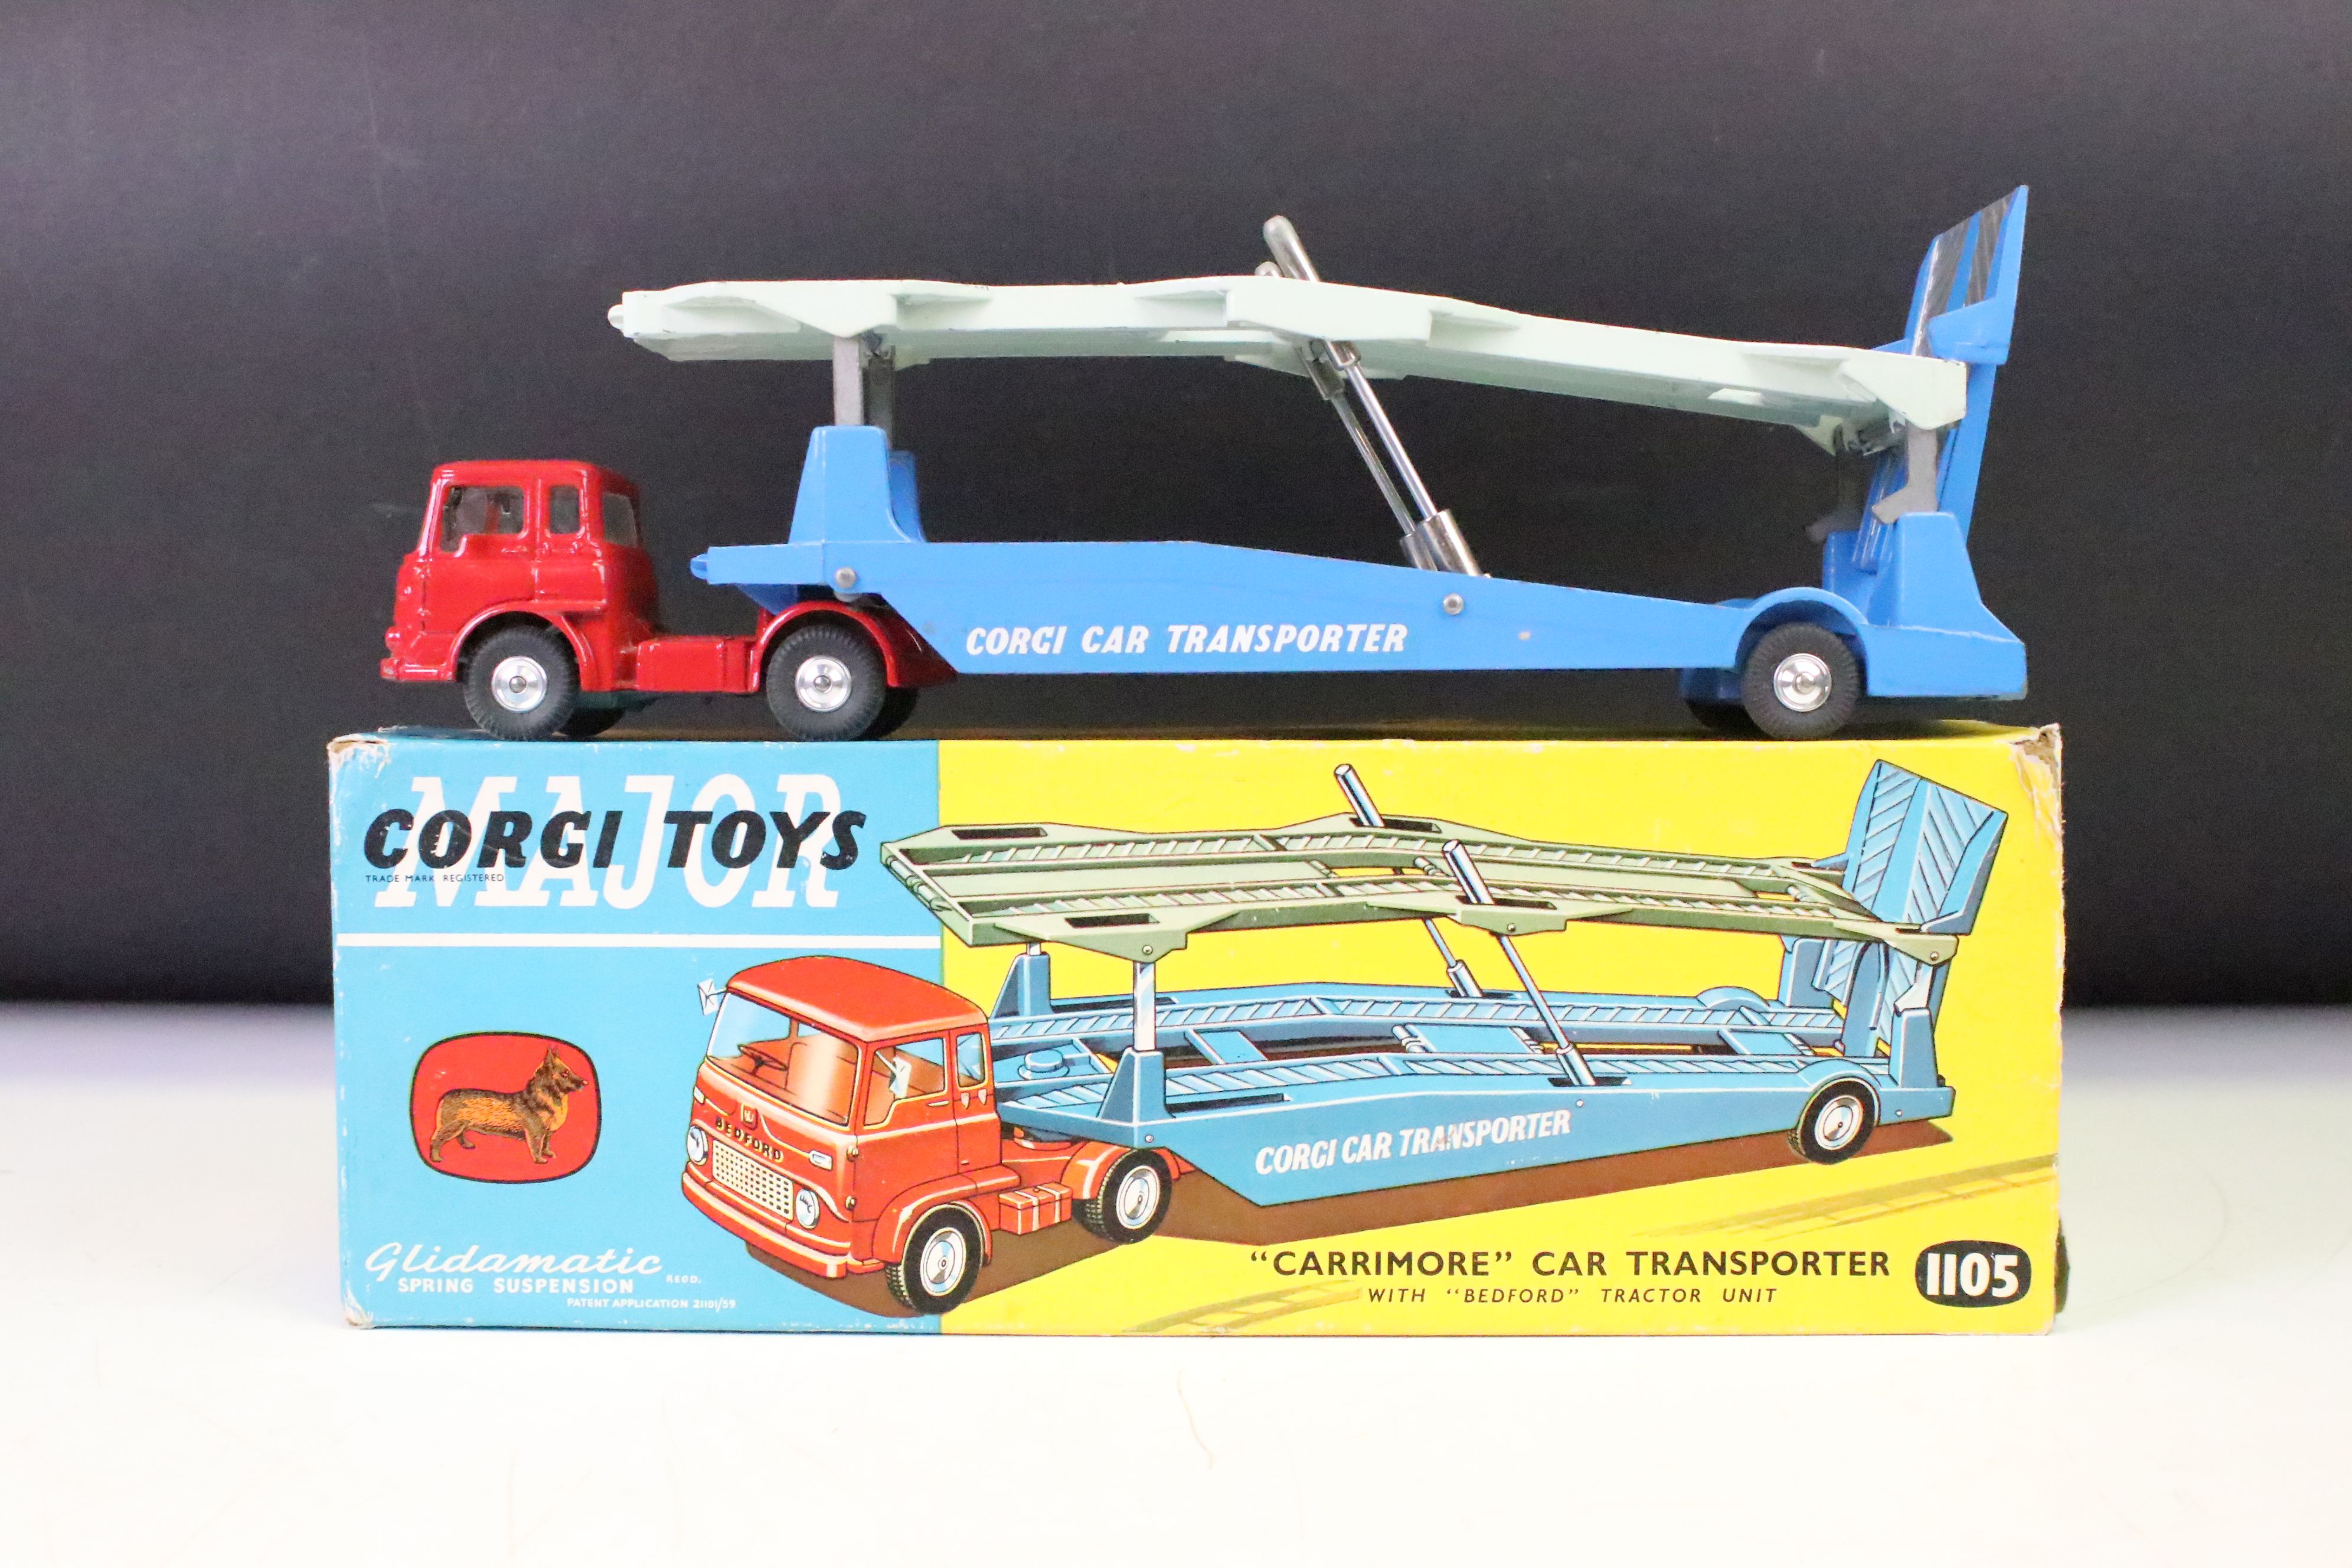 Boxed Corgi Major 1105 "Carrimore" Car Transporter with "Bedford" Tractor Unit, with operating